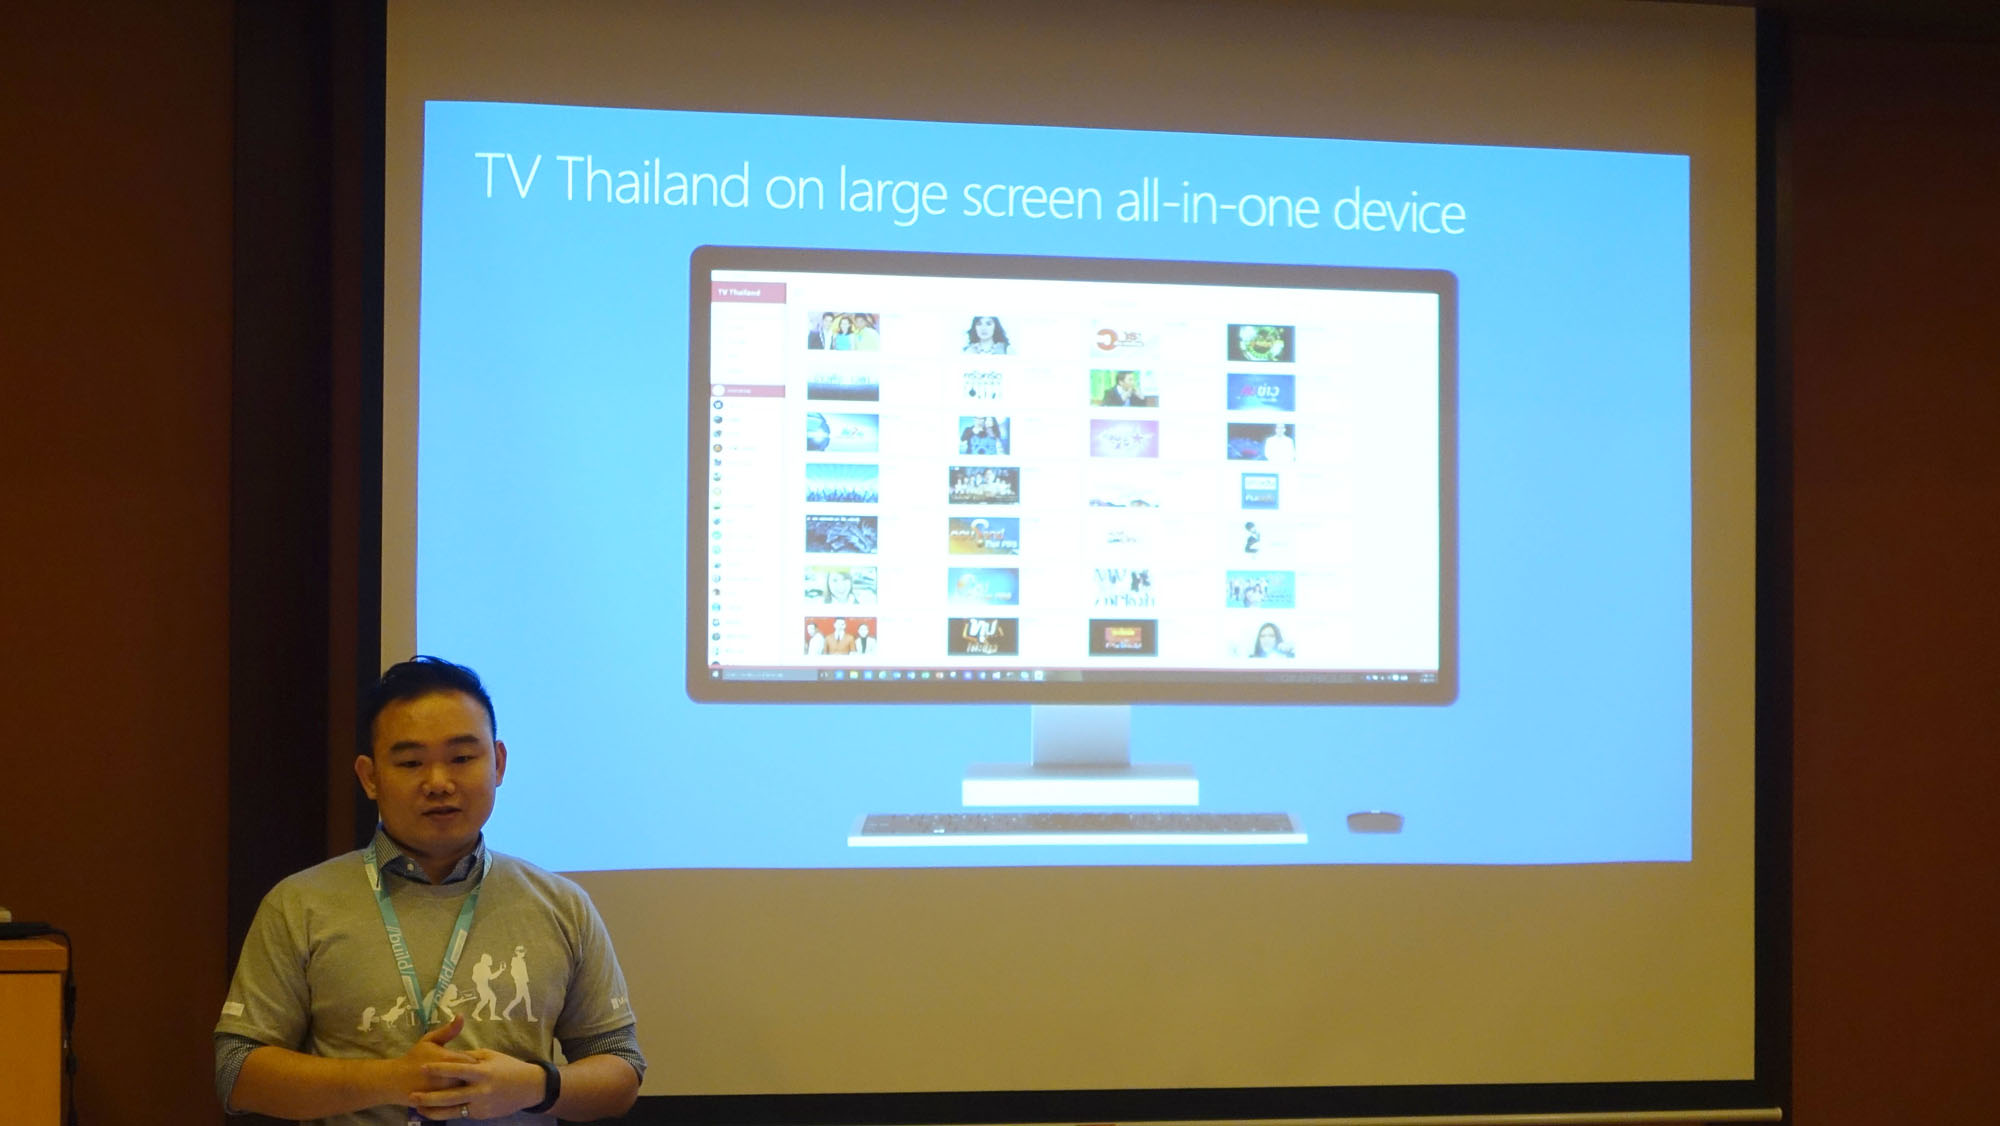 Sanguan Thammarojsakul, Technical Evangelist for Microsoft Thailand, shows off the TV Thailand app which runs on the Universal Windows Platform for Windows 10. This means the app can run across the Windows 10 family of devices from smartphones to desktop PCs. 